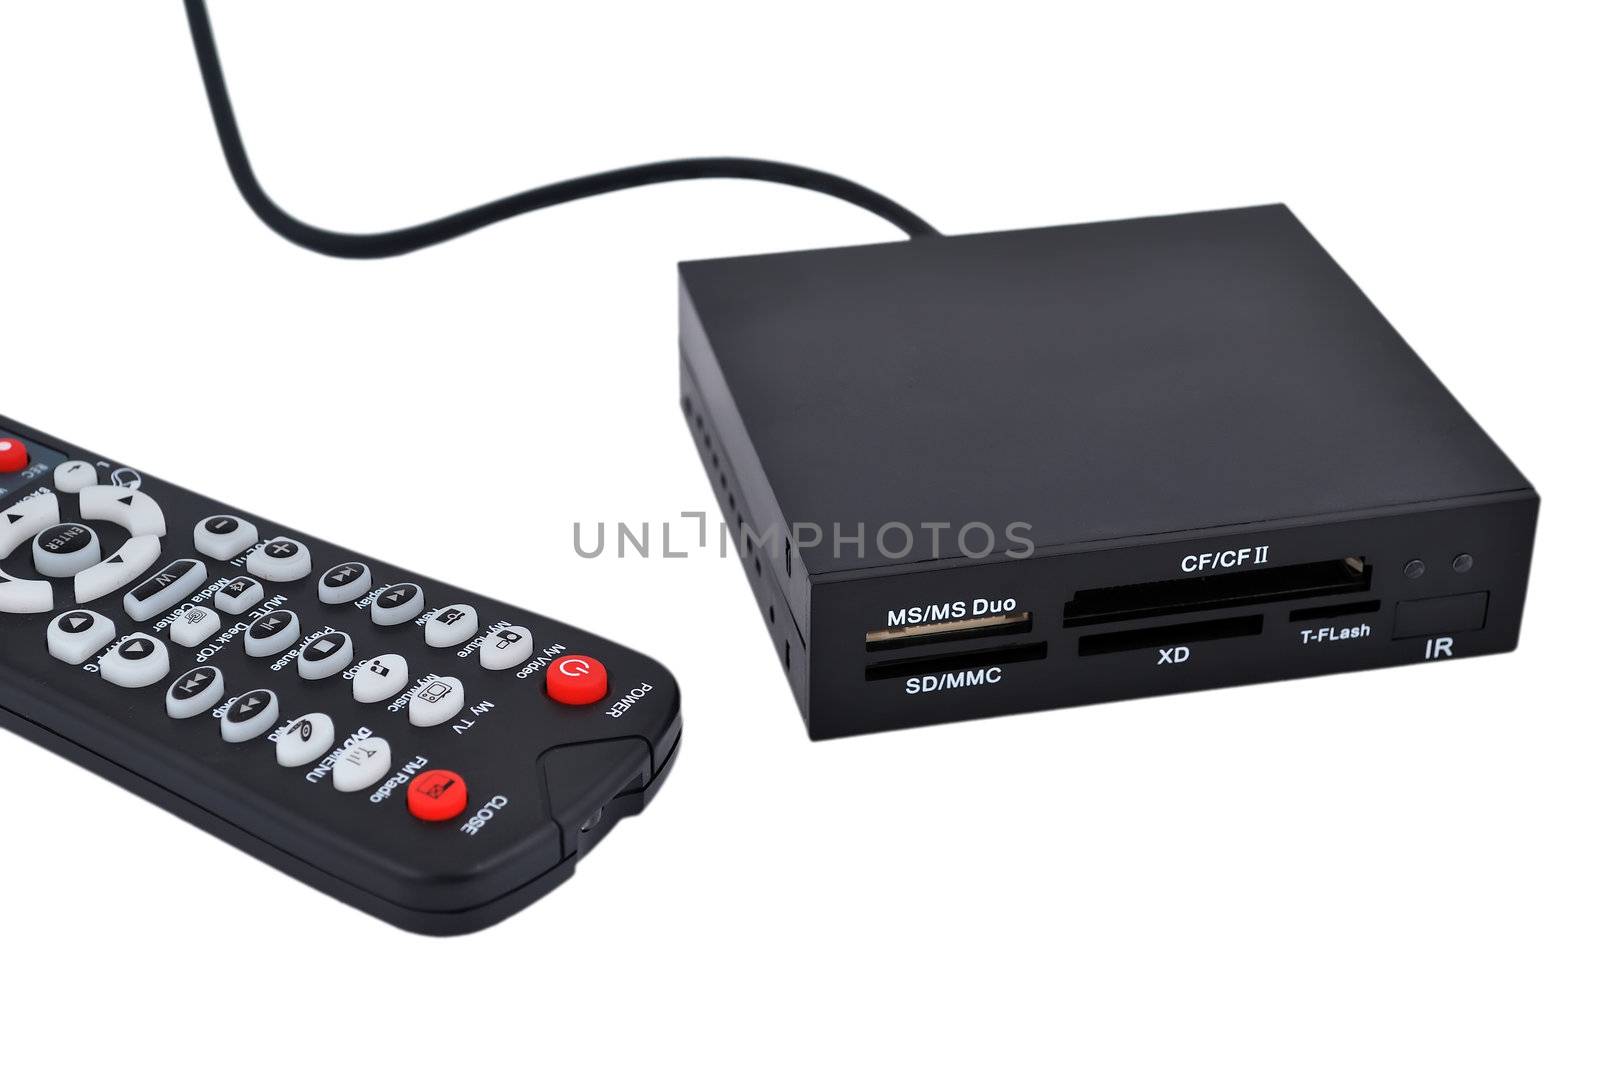 card reader and a remote control for your computer